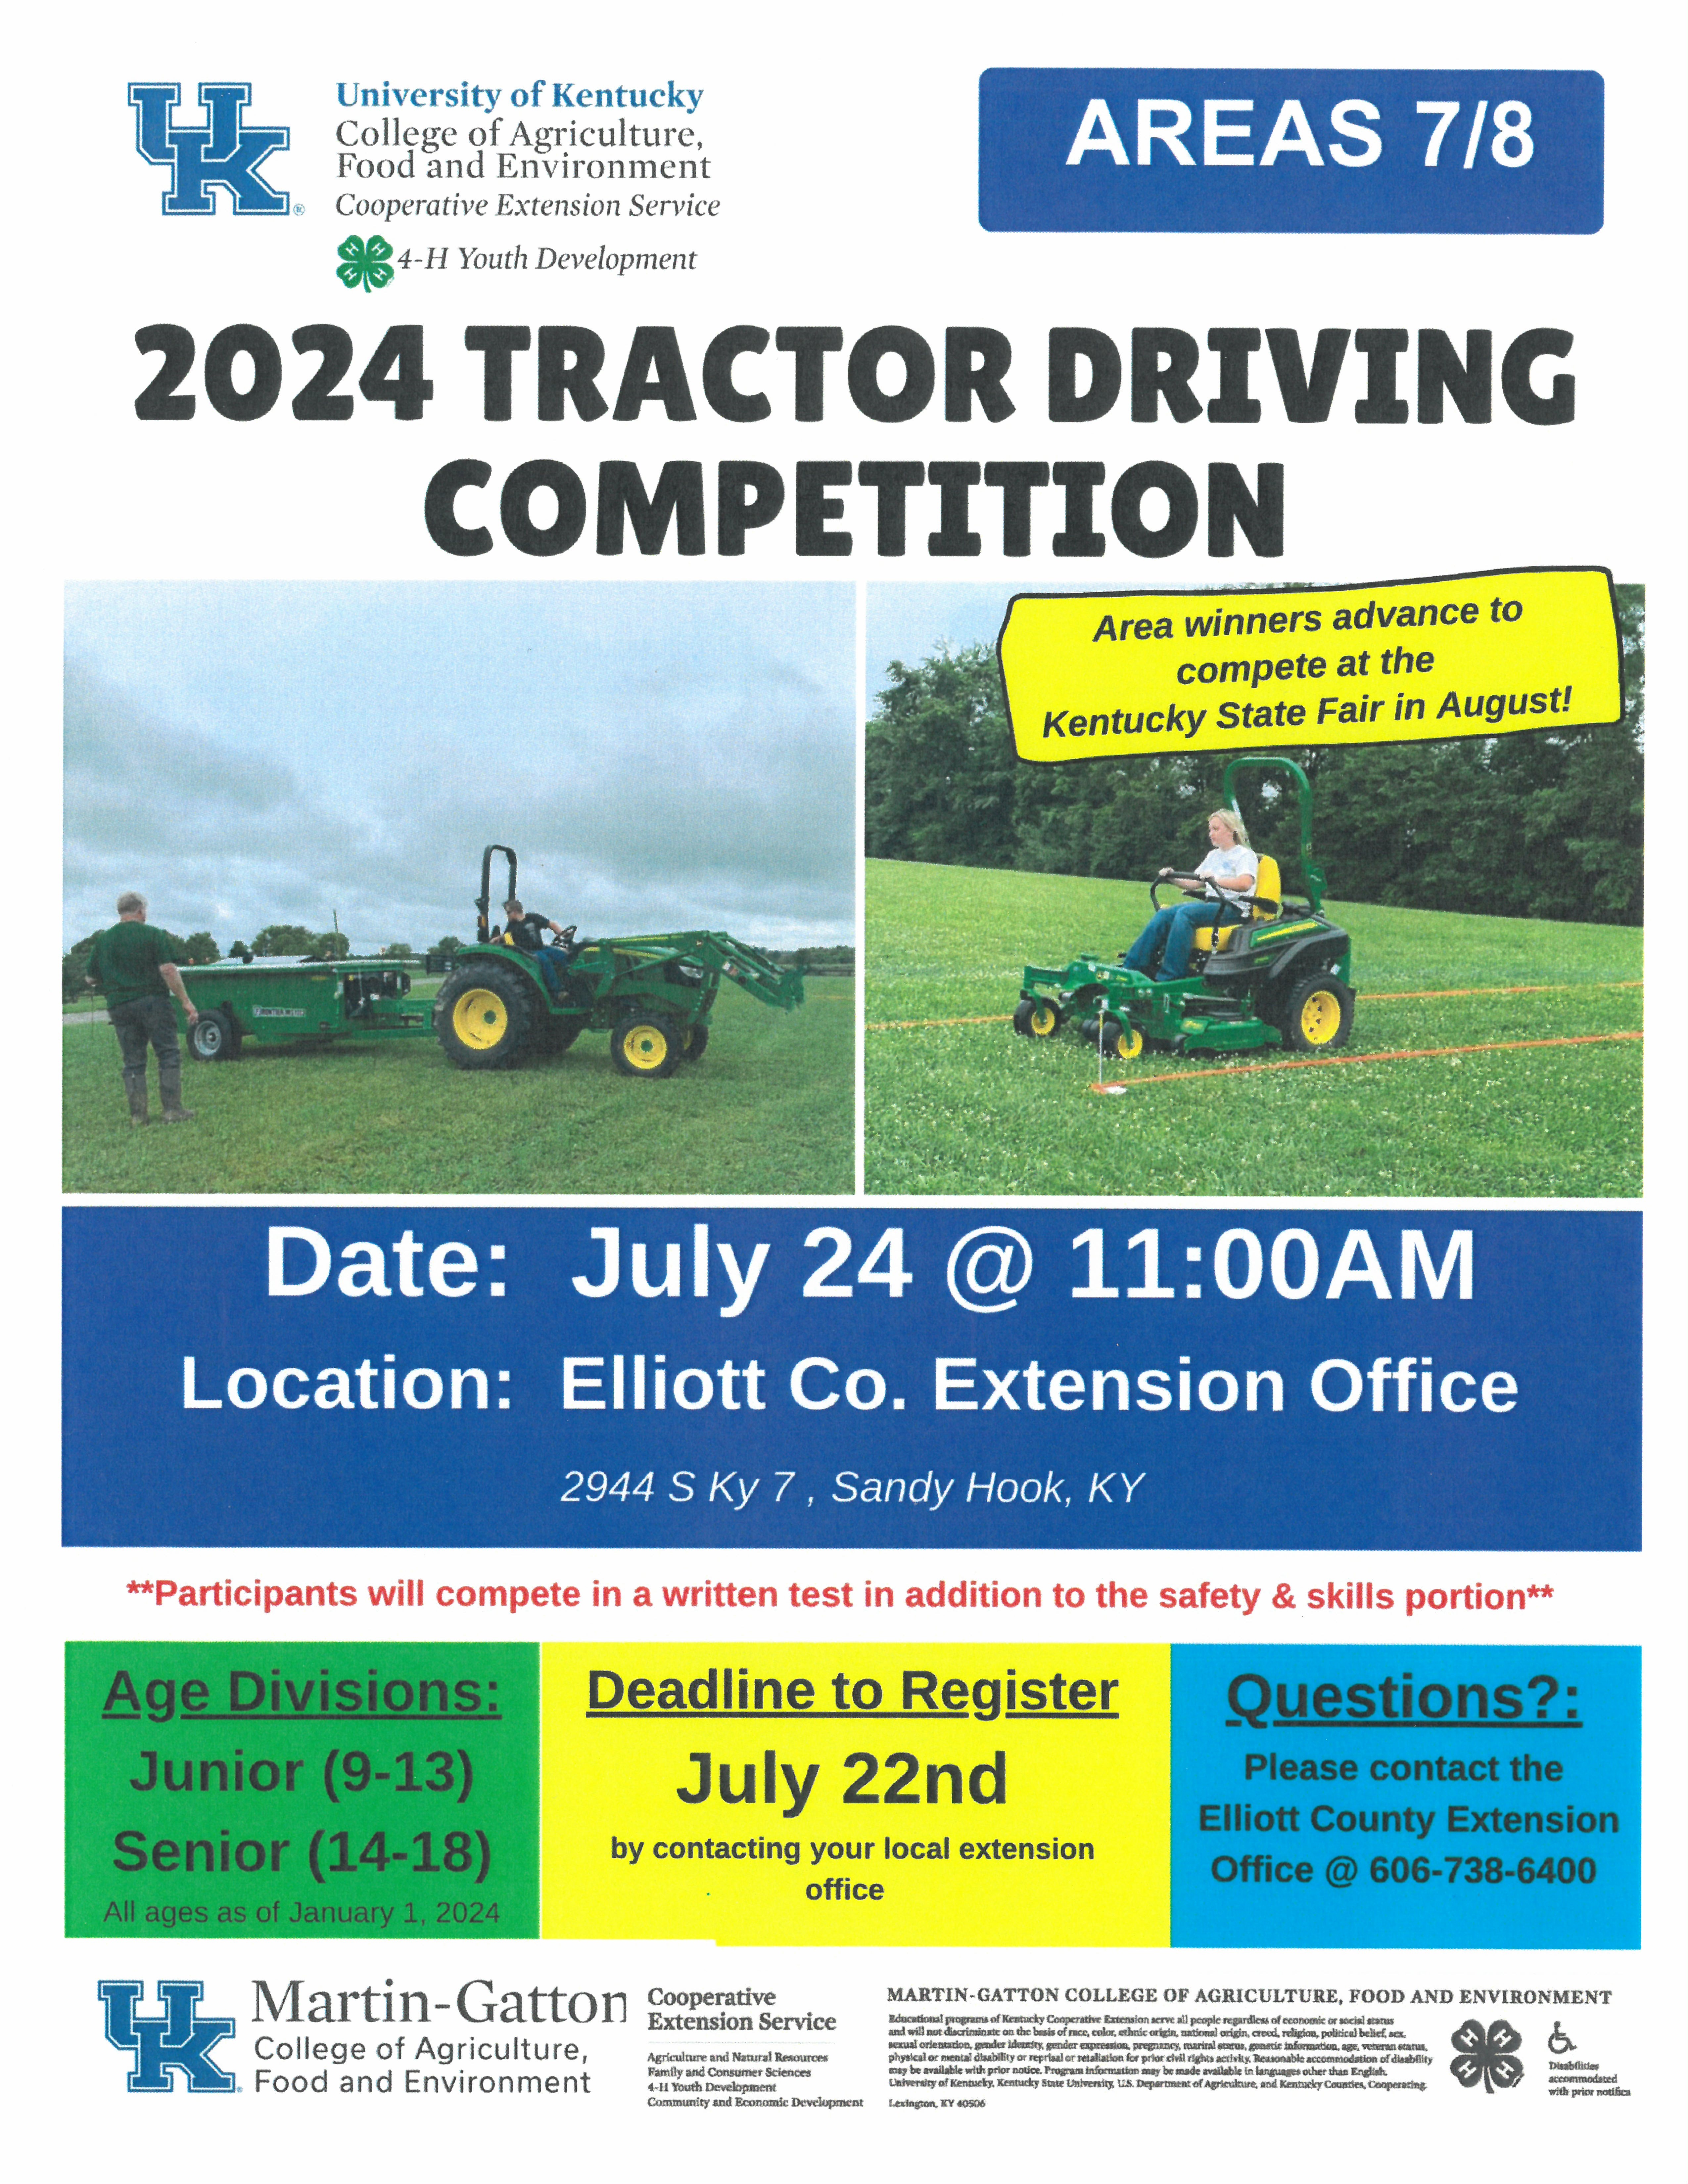 2024 Tractor Driving Competition July 24th 11am Elliot Co. CES